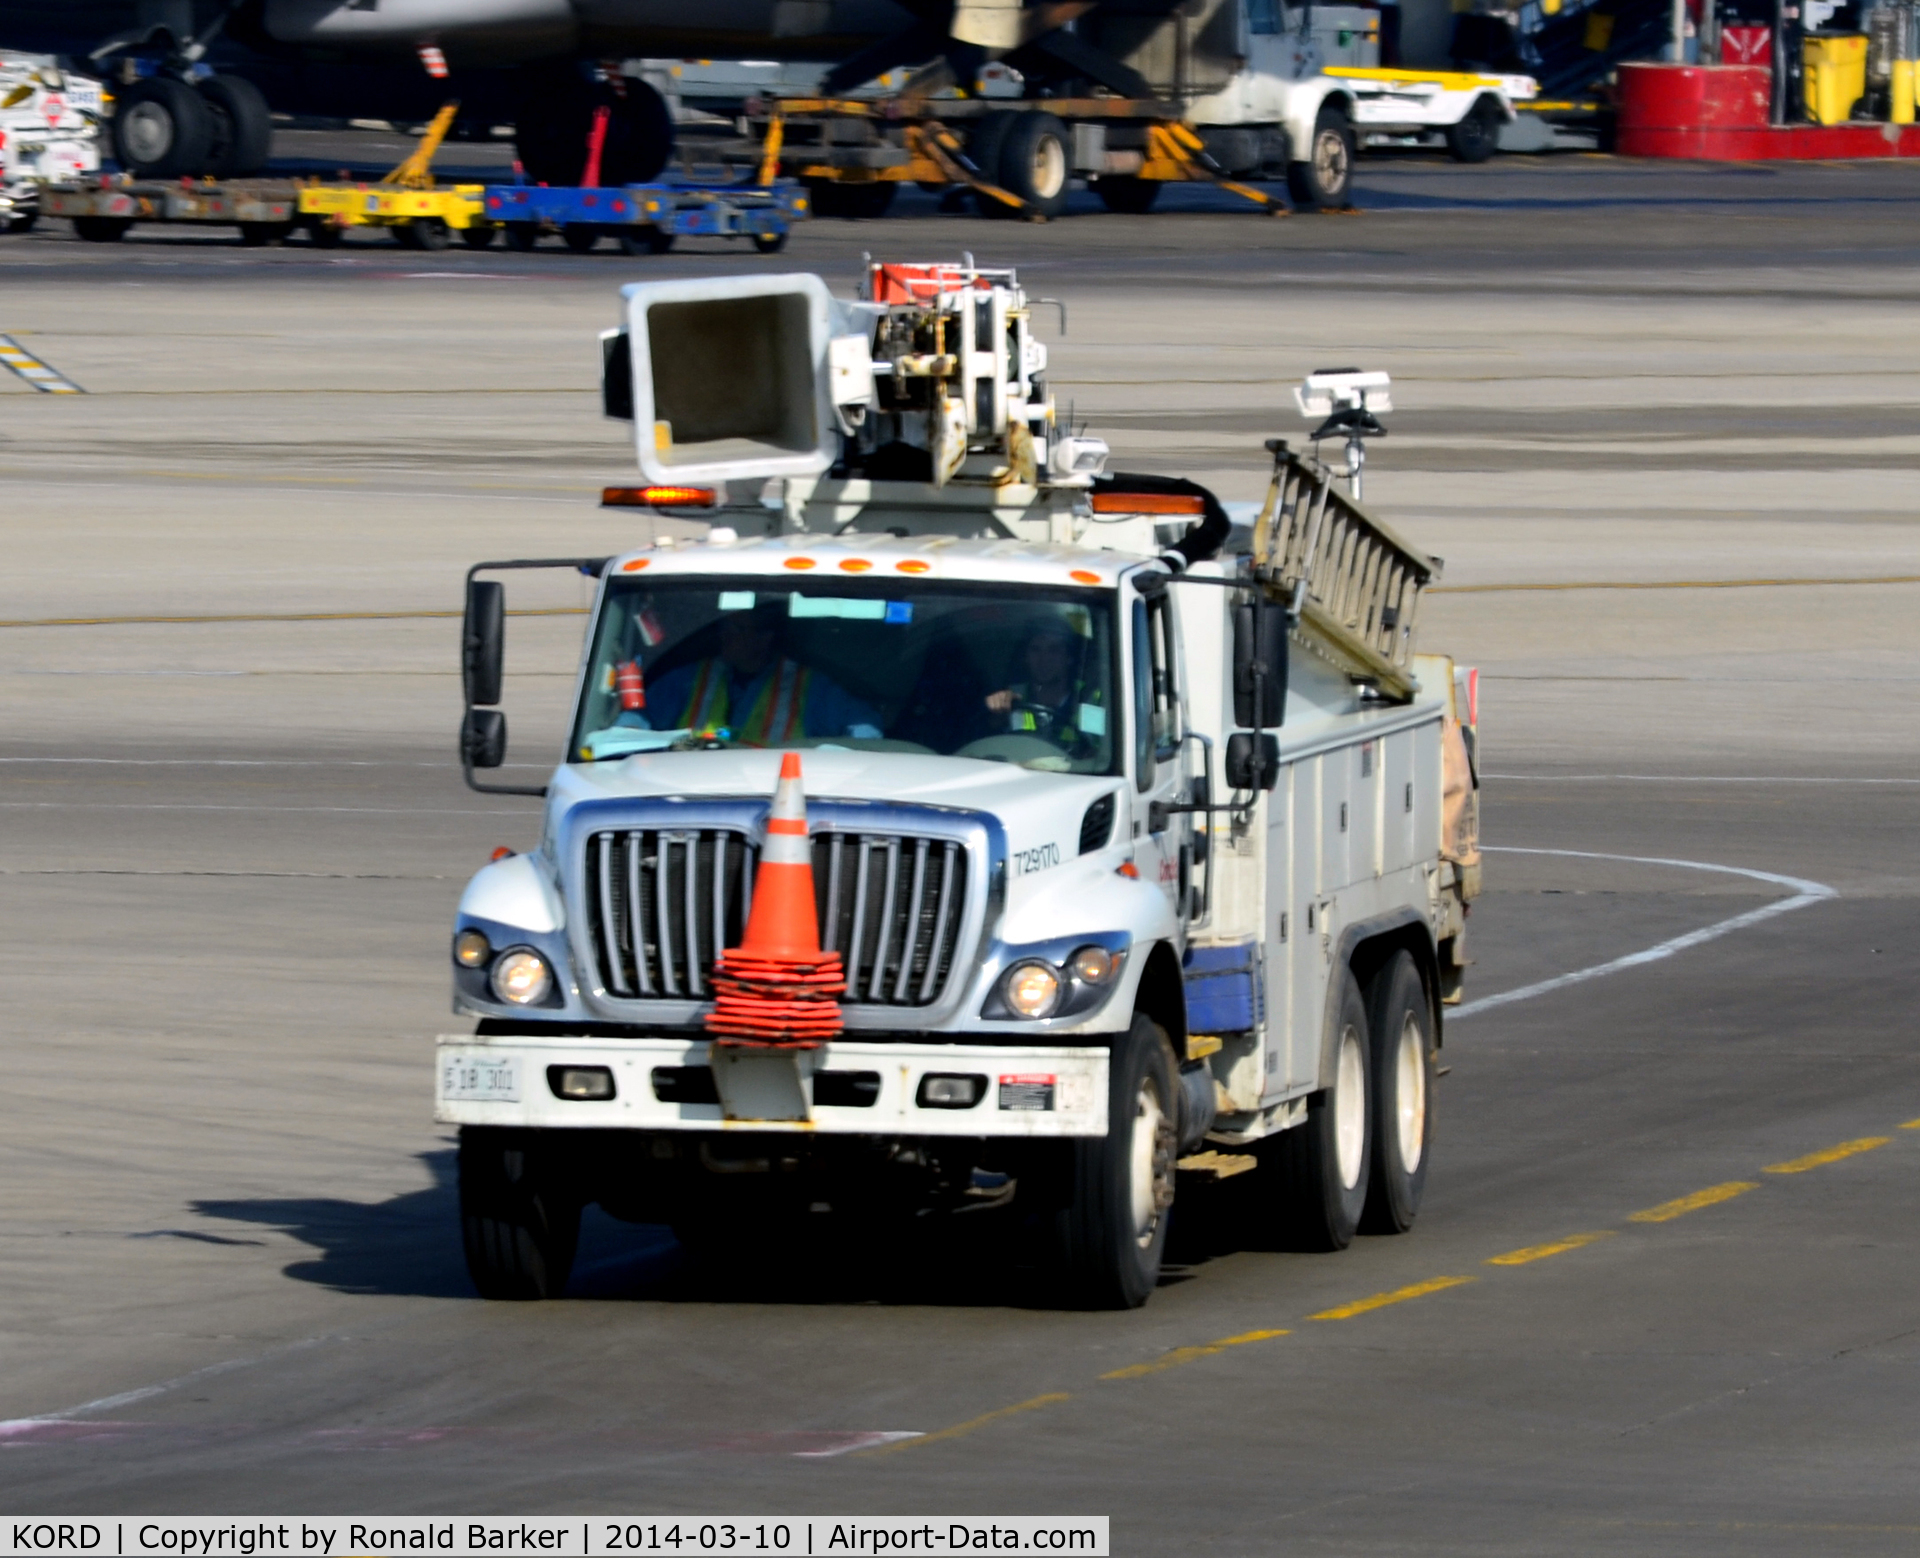 Chicago O'hare International Airport (ORD) - Deicing truck approaching at O'Hare